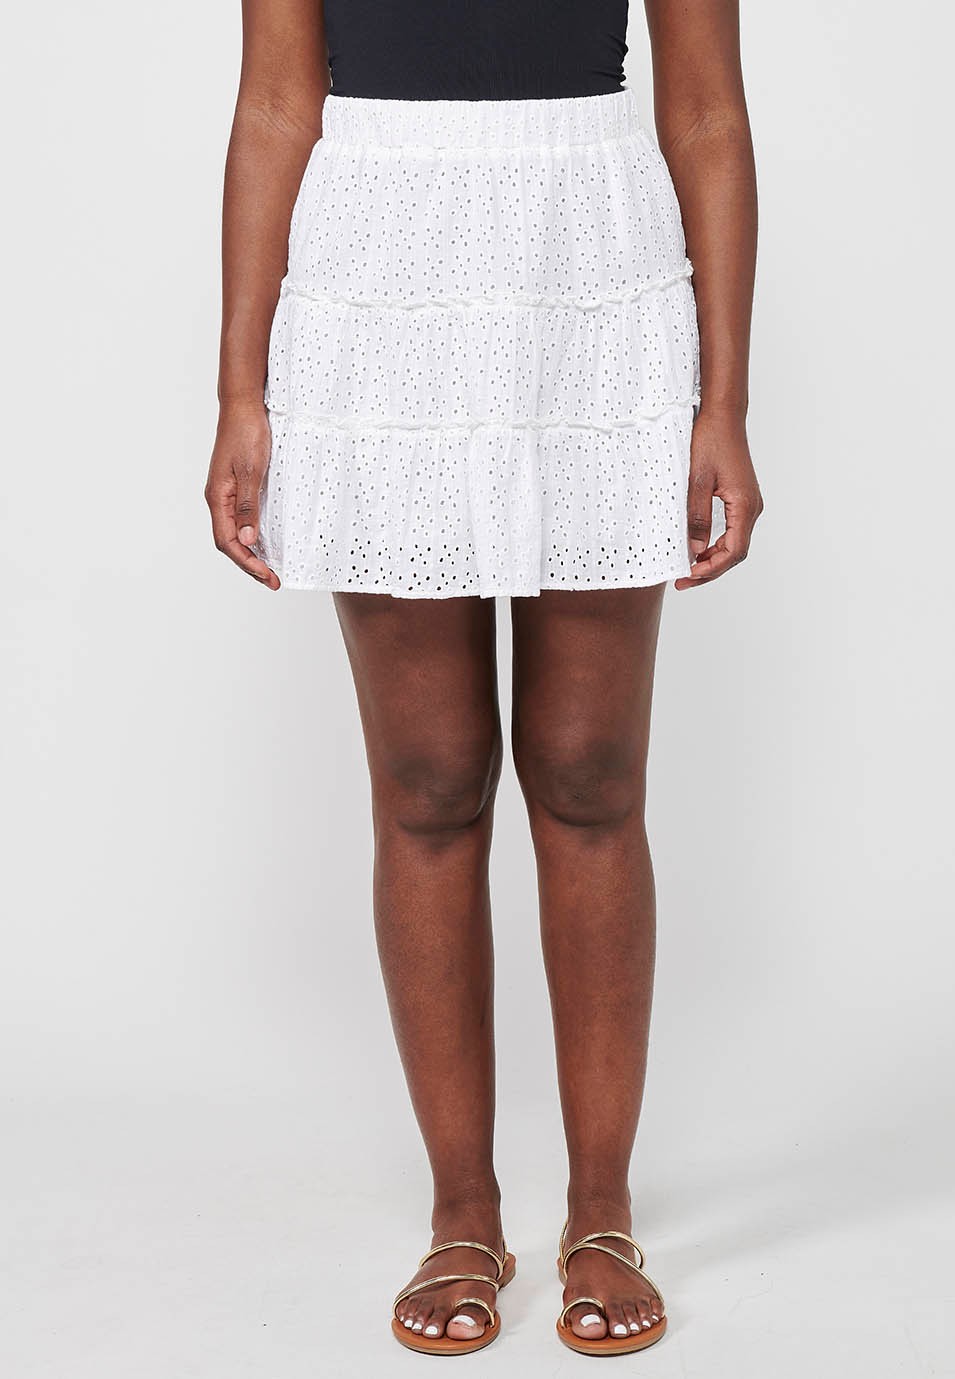 Short cotton skirt, with ruffle and embroidery, fitted at the waist with elastic band, white color for women